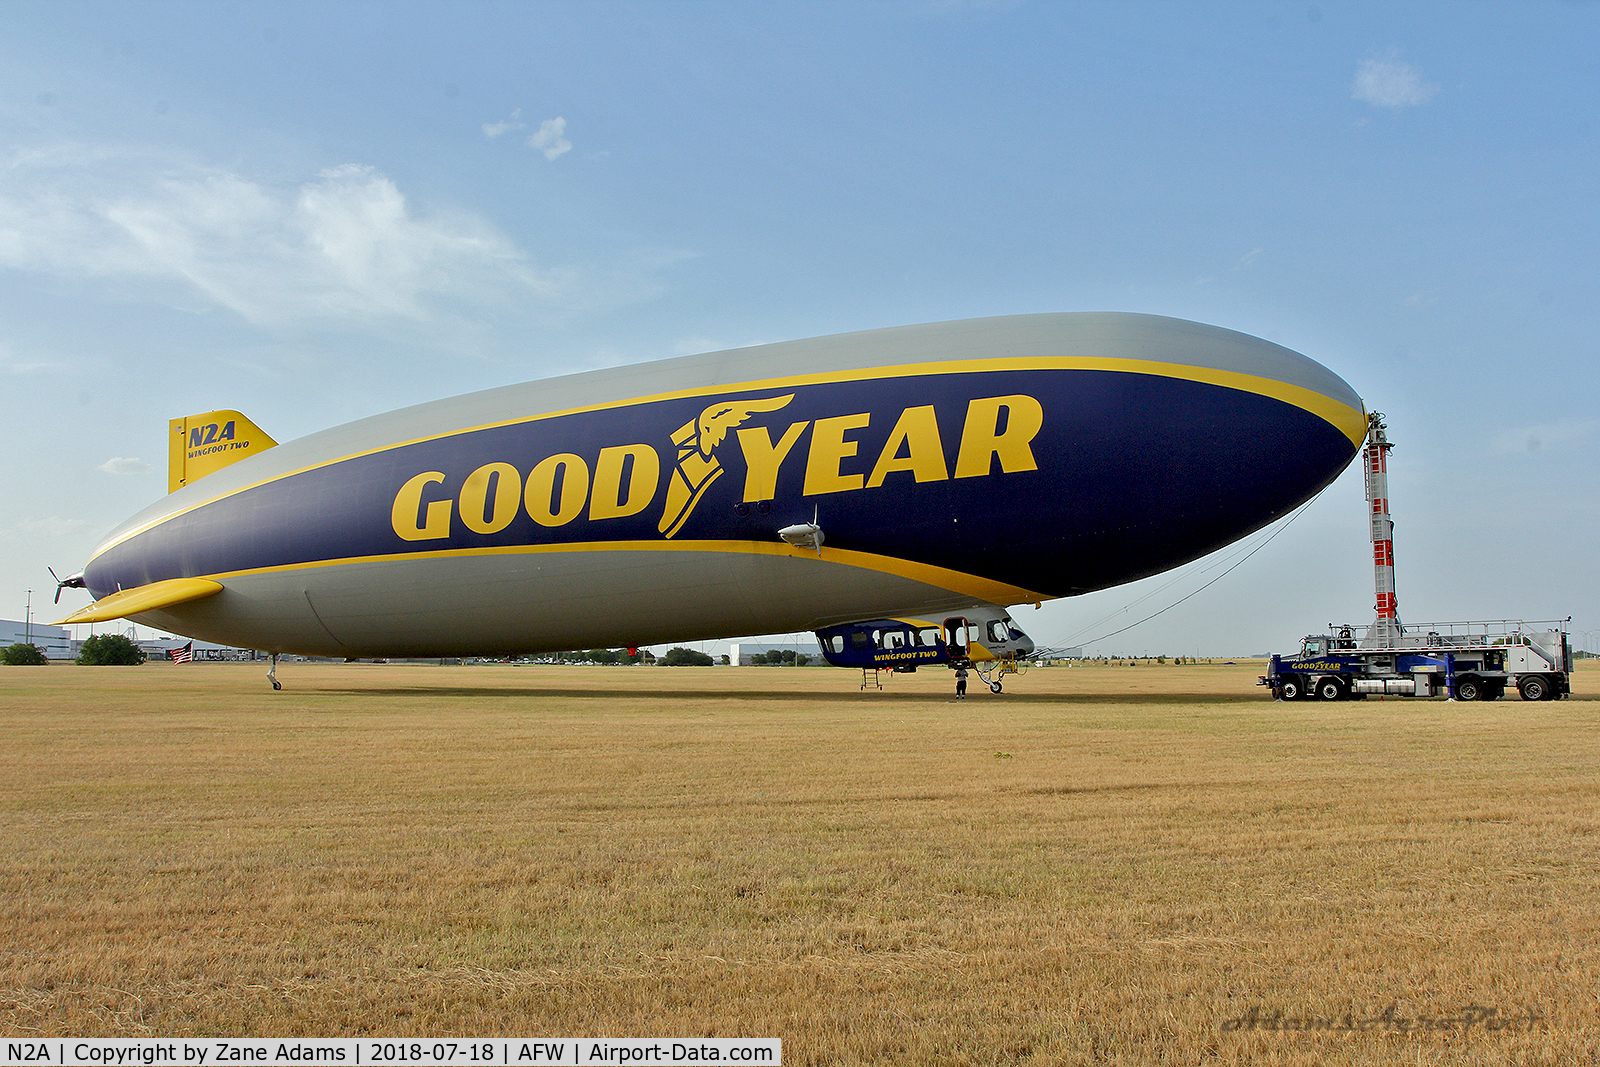 N2A, 2016 Zeppelin LZ N07-101 C/N 007, Wingfoot Two at Alliance Airport - Fort Worth, TX